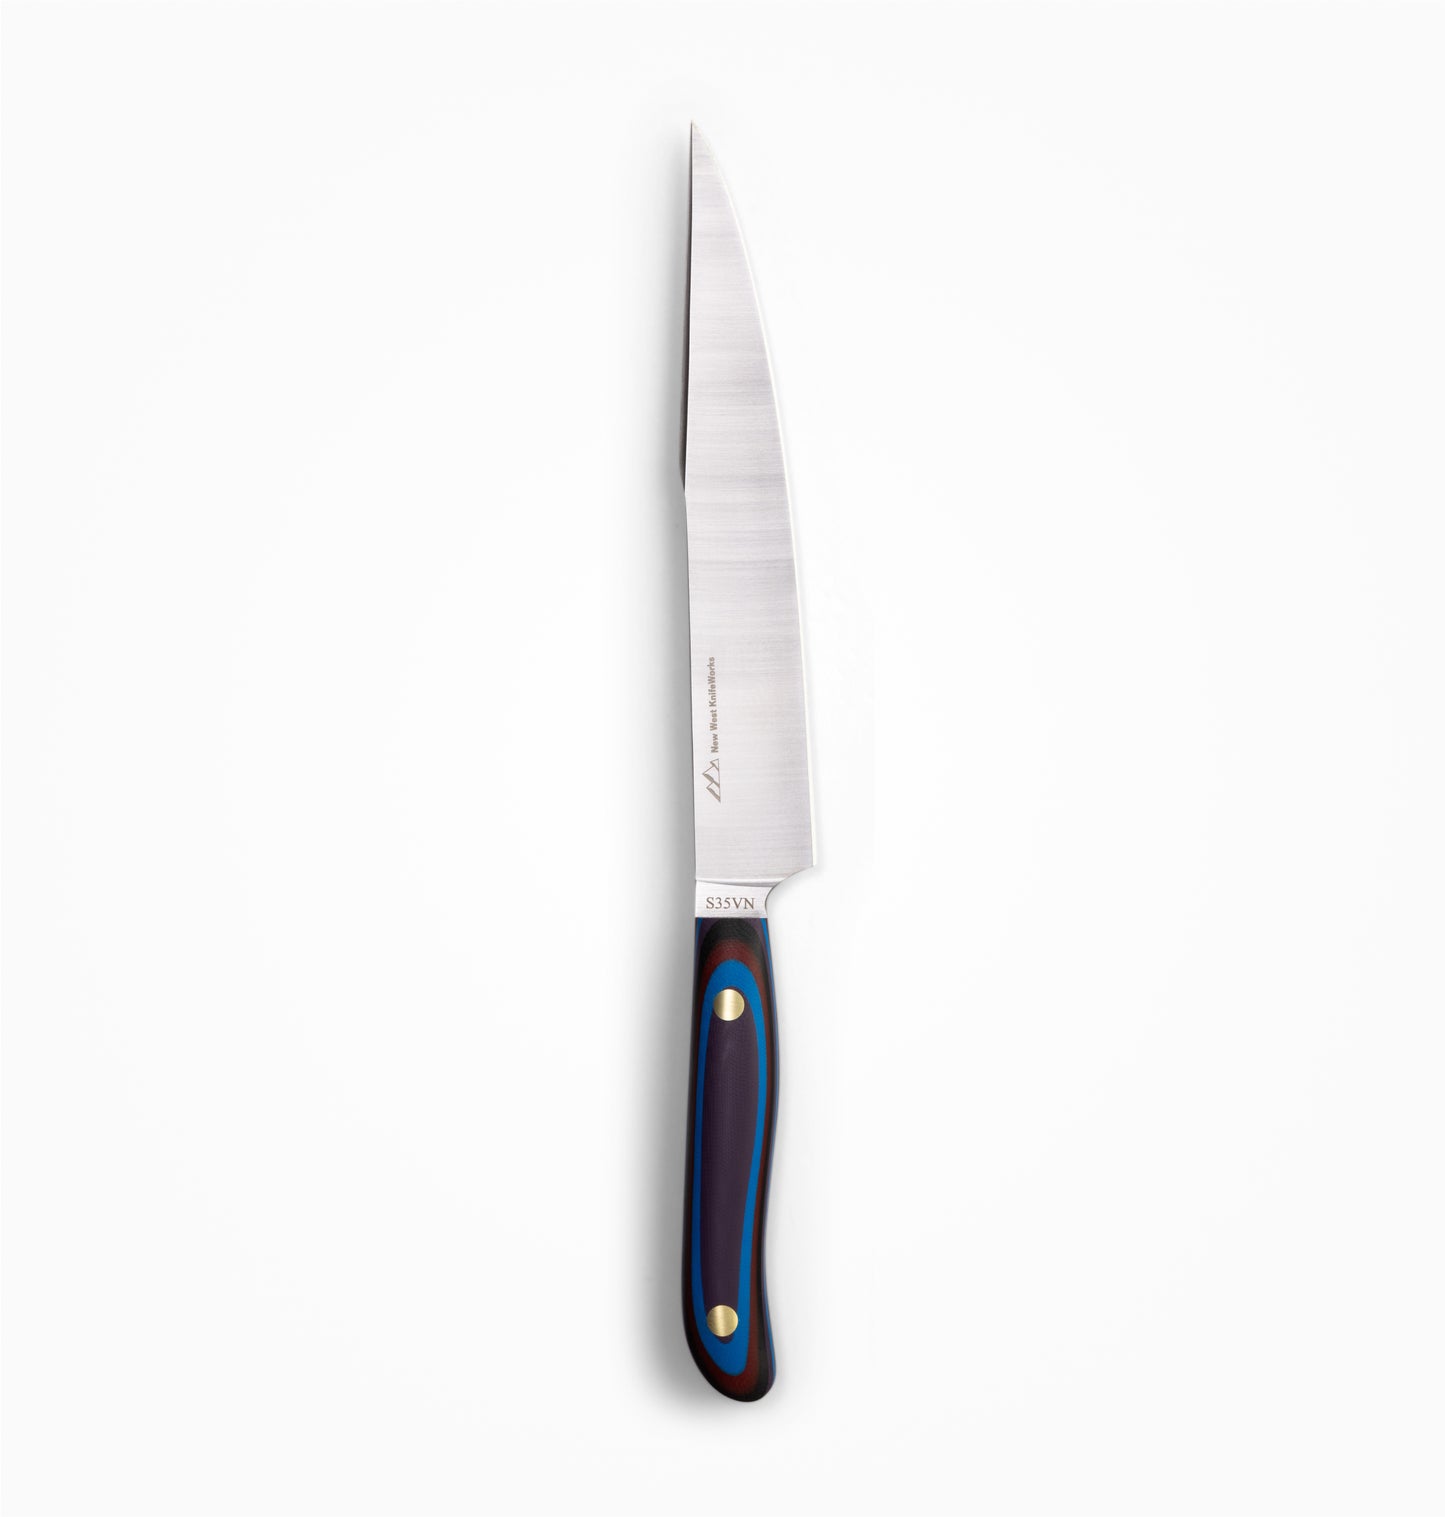 9" Carving Knife